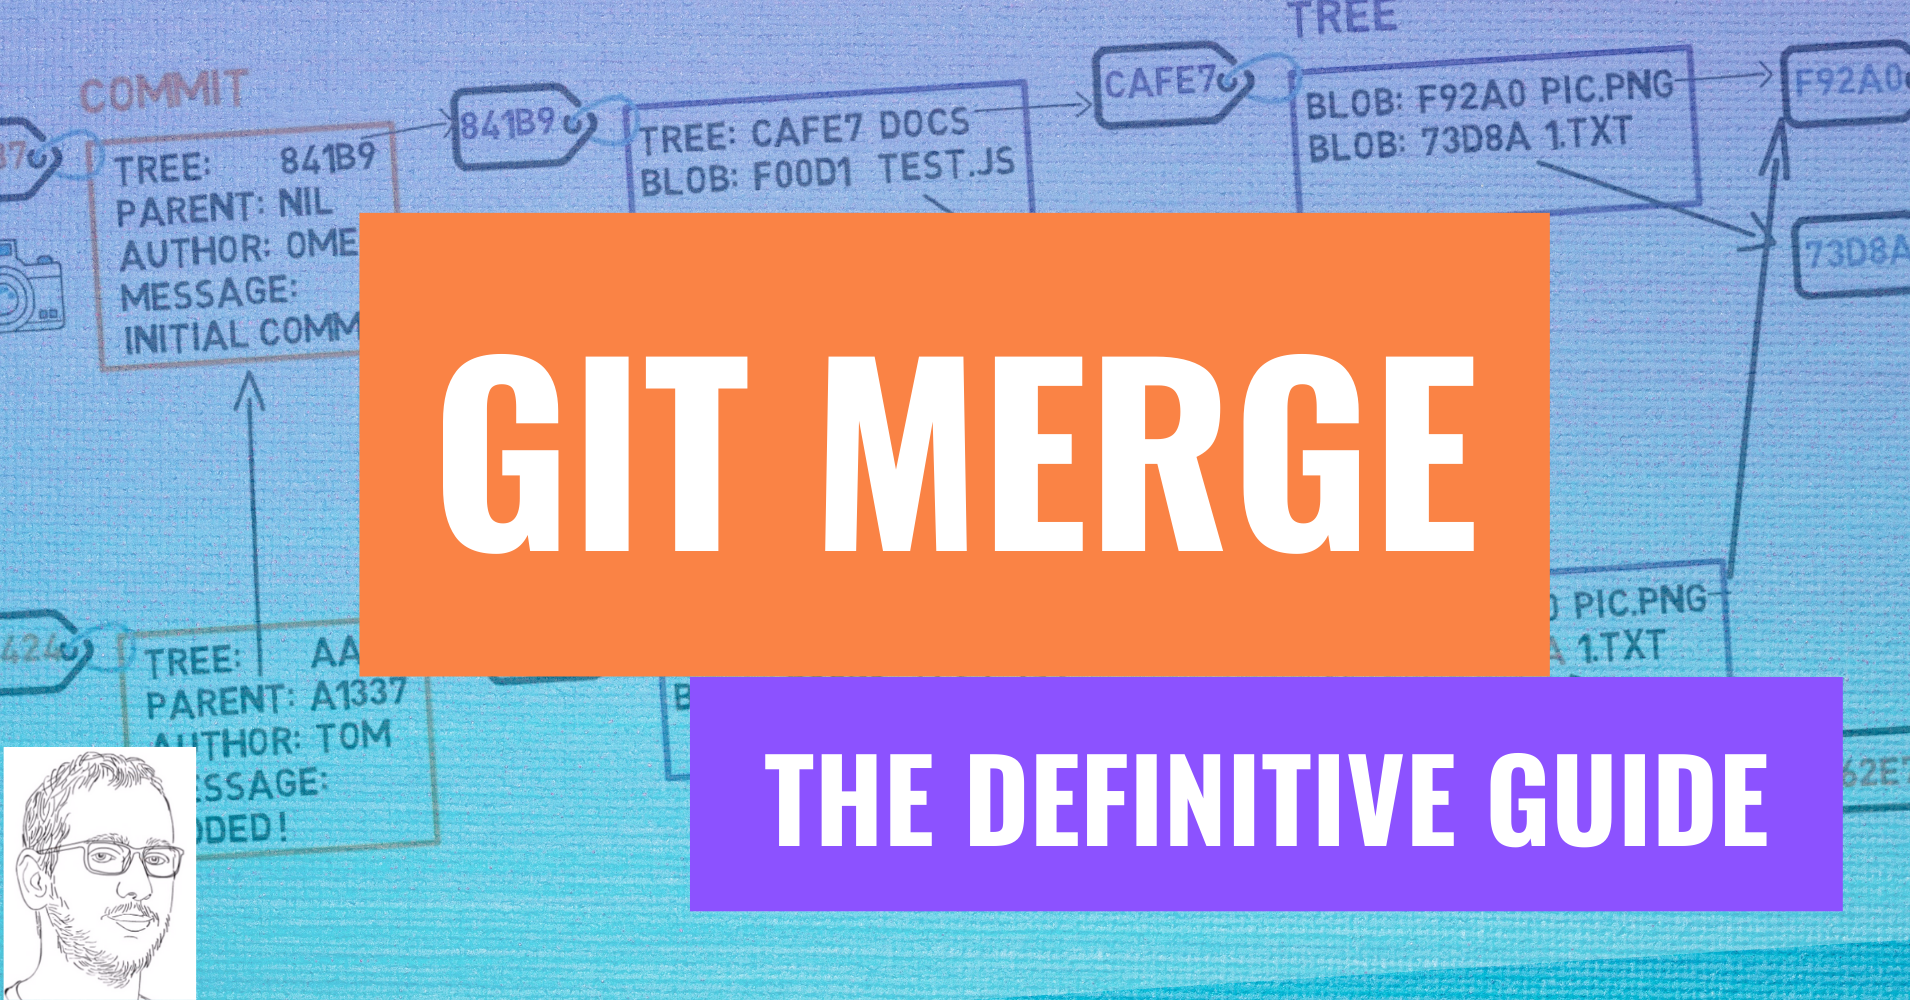 By reading this post, you are going to really understand git merge, one of the most common operations you'll perform in your Git repositories. Merging